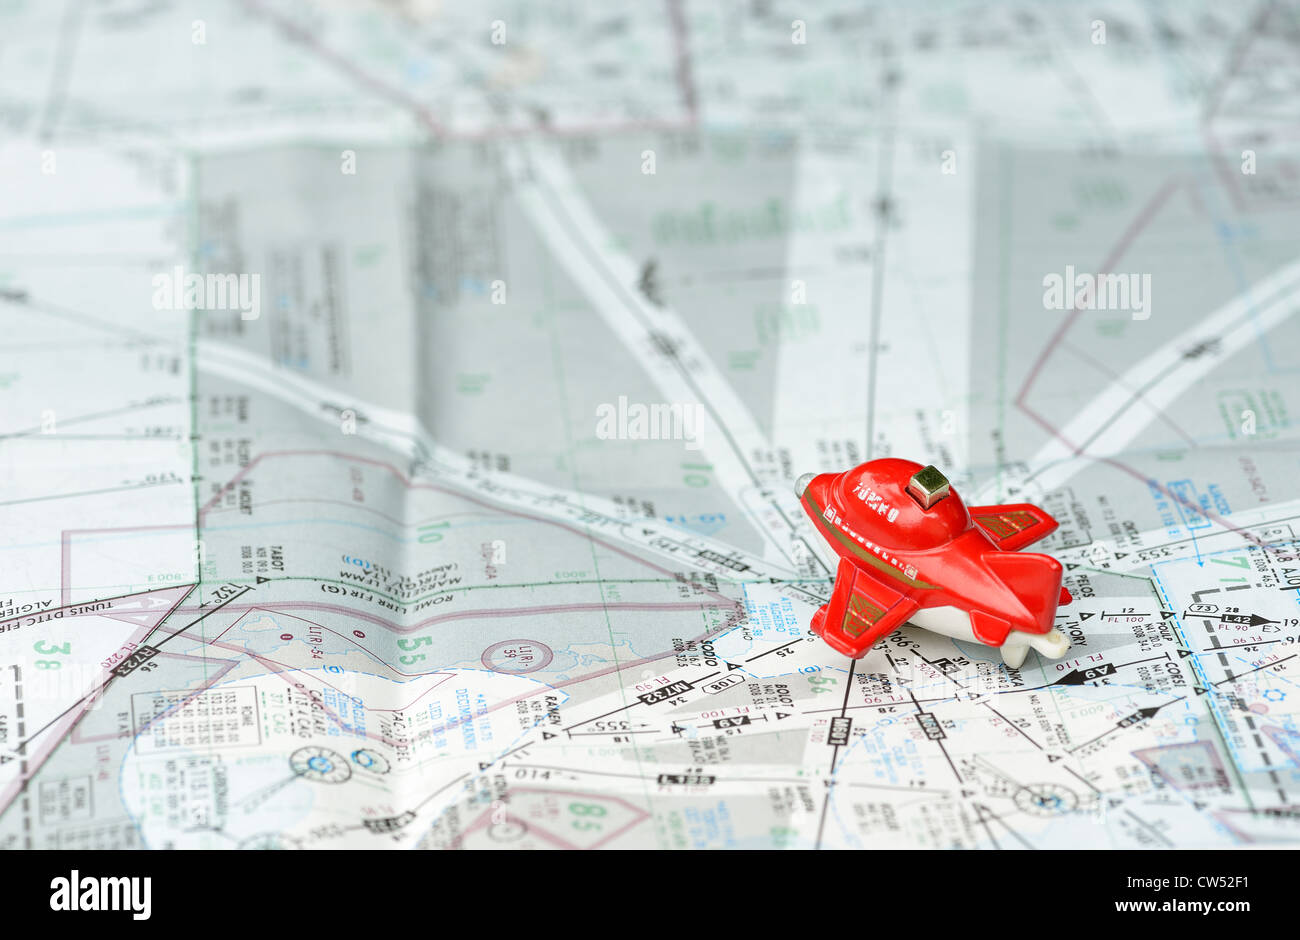 The red toy plane is on the route chart for traveling concept. Stock Photo